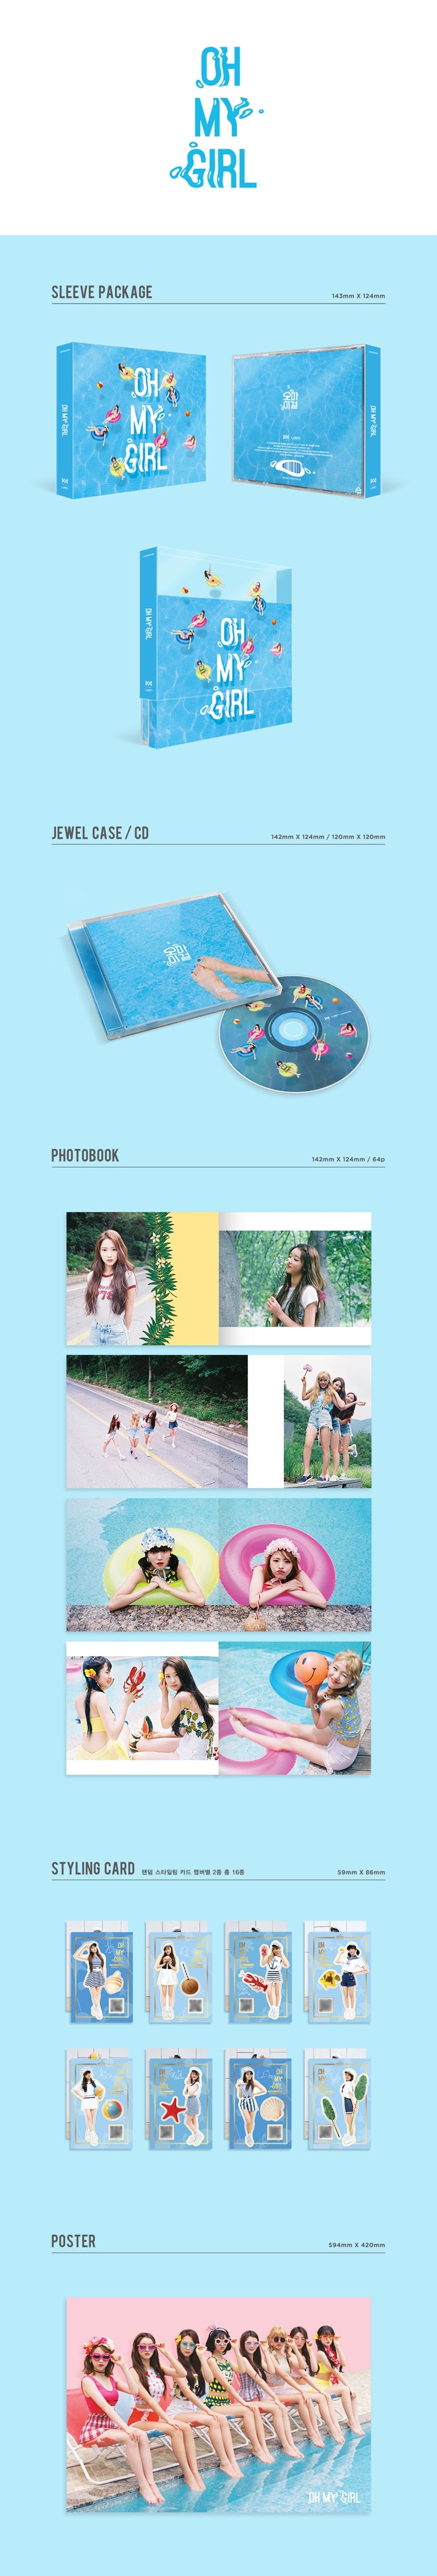 Fairy of Wind “Oh My Girl” Summer Special Album [Listen to Me] released A remake summer special album filled with songs we...